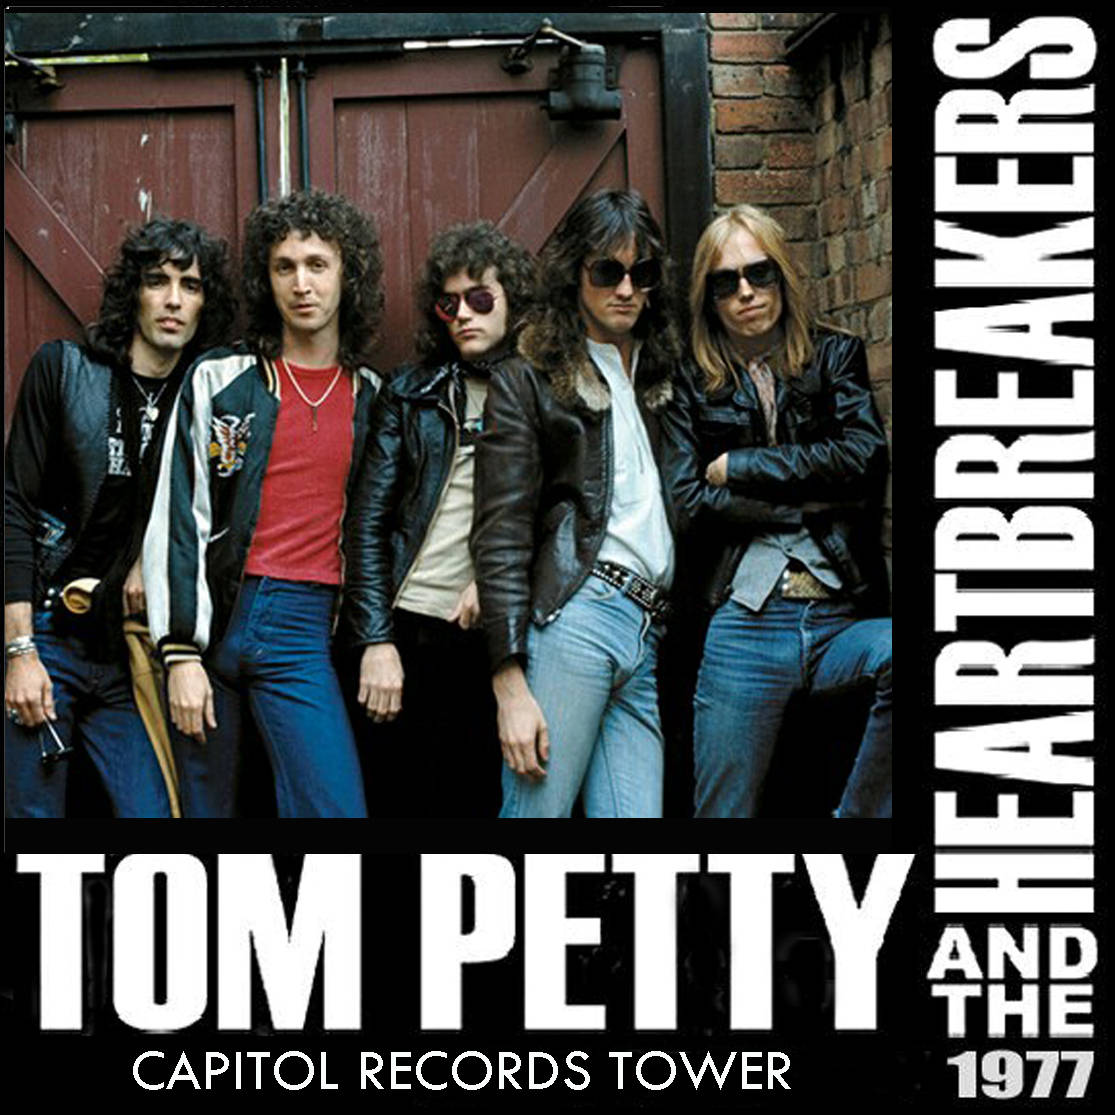 American Rock Band Tom Petty And The Heartbreakers 1977 Album Wallpaper